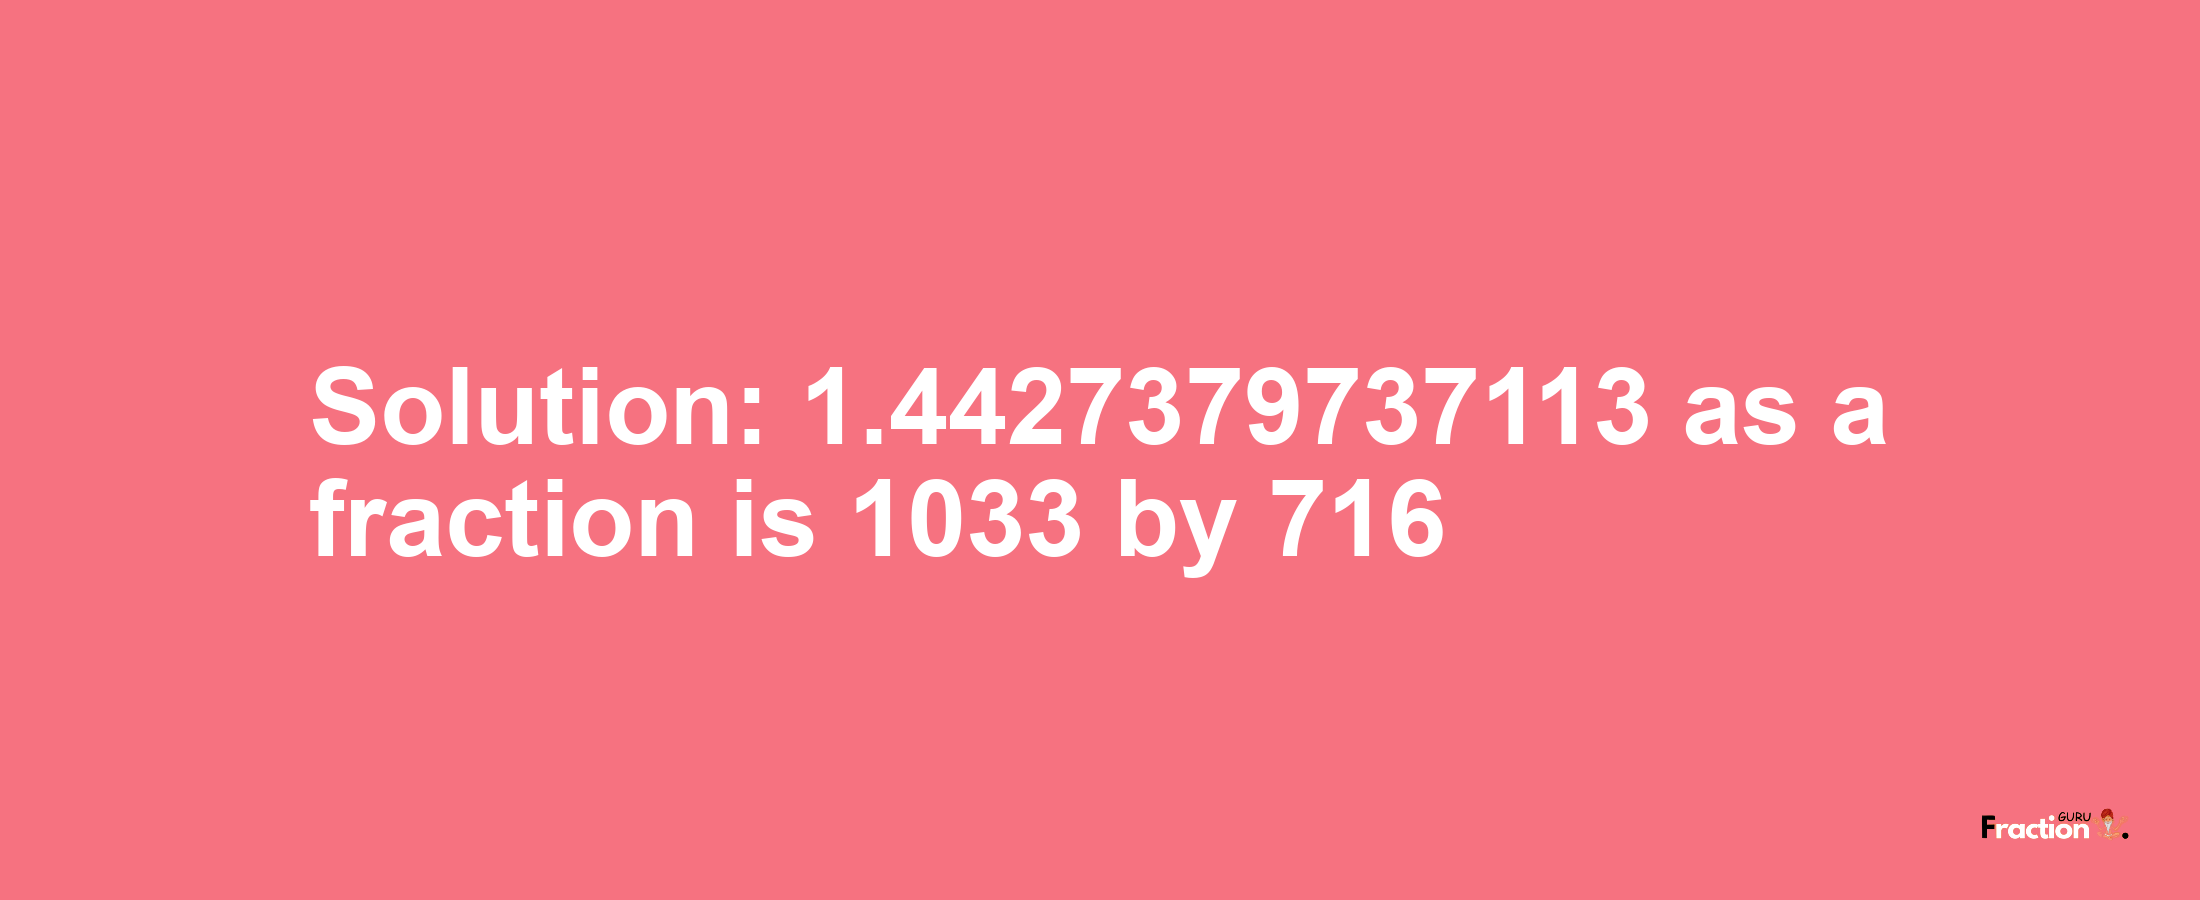 Solution:1.4427379737113 as a fraction is 1033/716